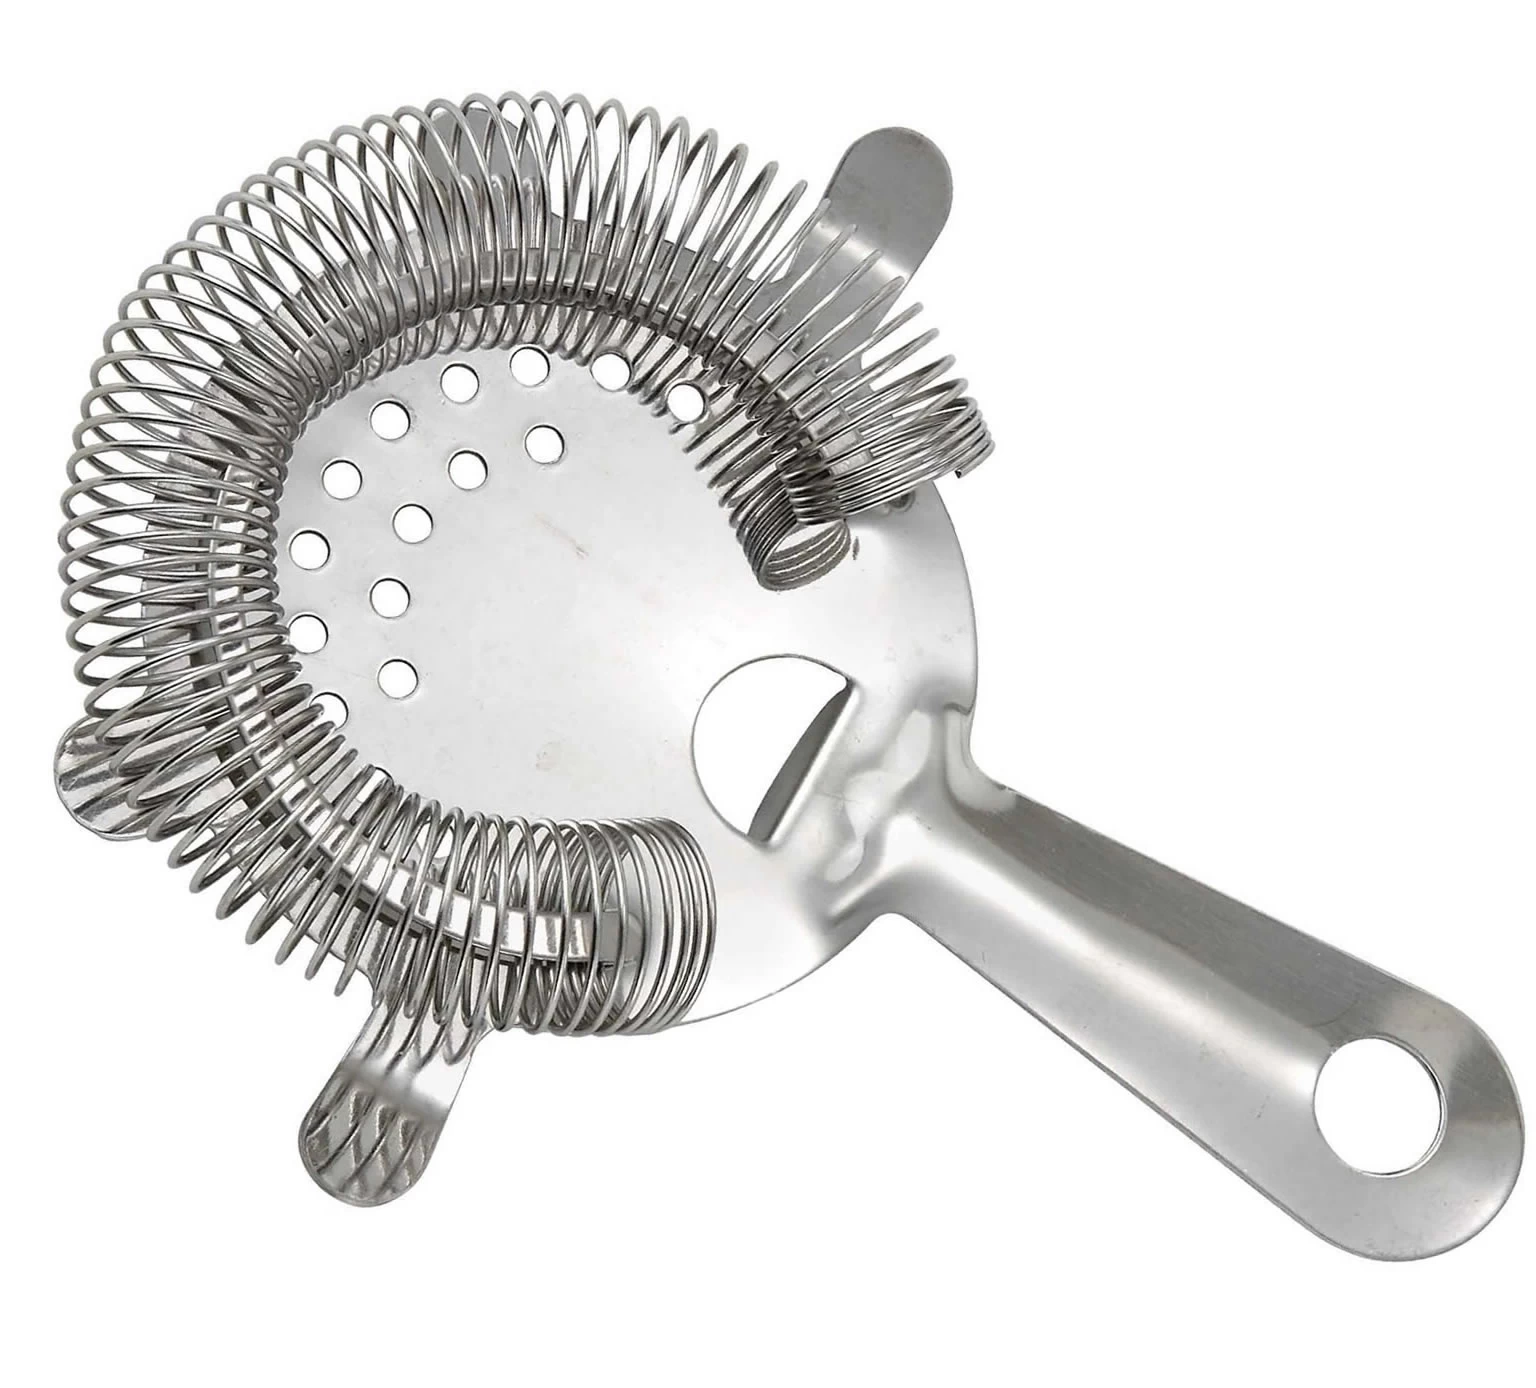 stainless steel cocktail strainer China, Stainless Steel Copper Plated Bar Strainer, China Kitchenware Supplier